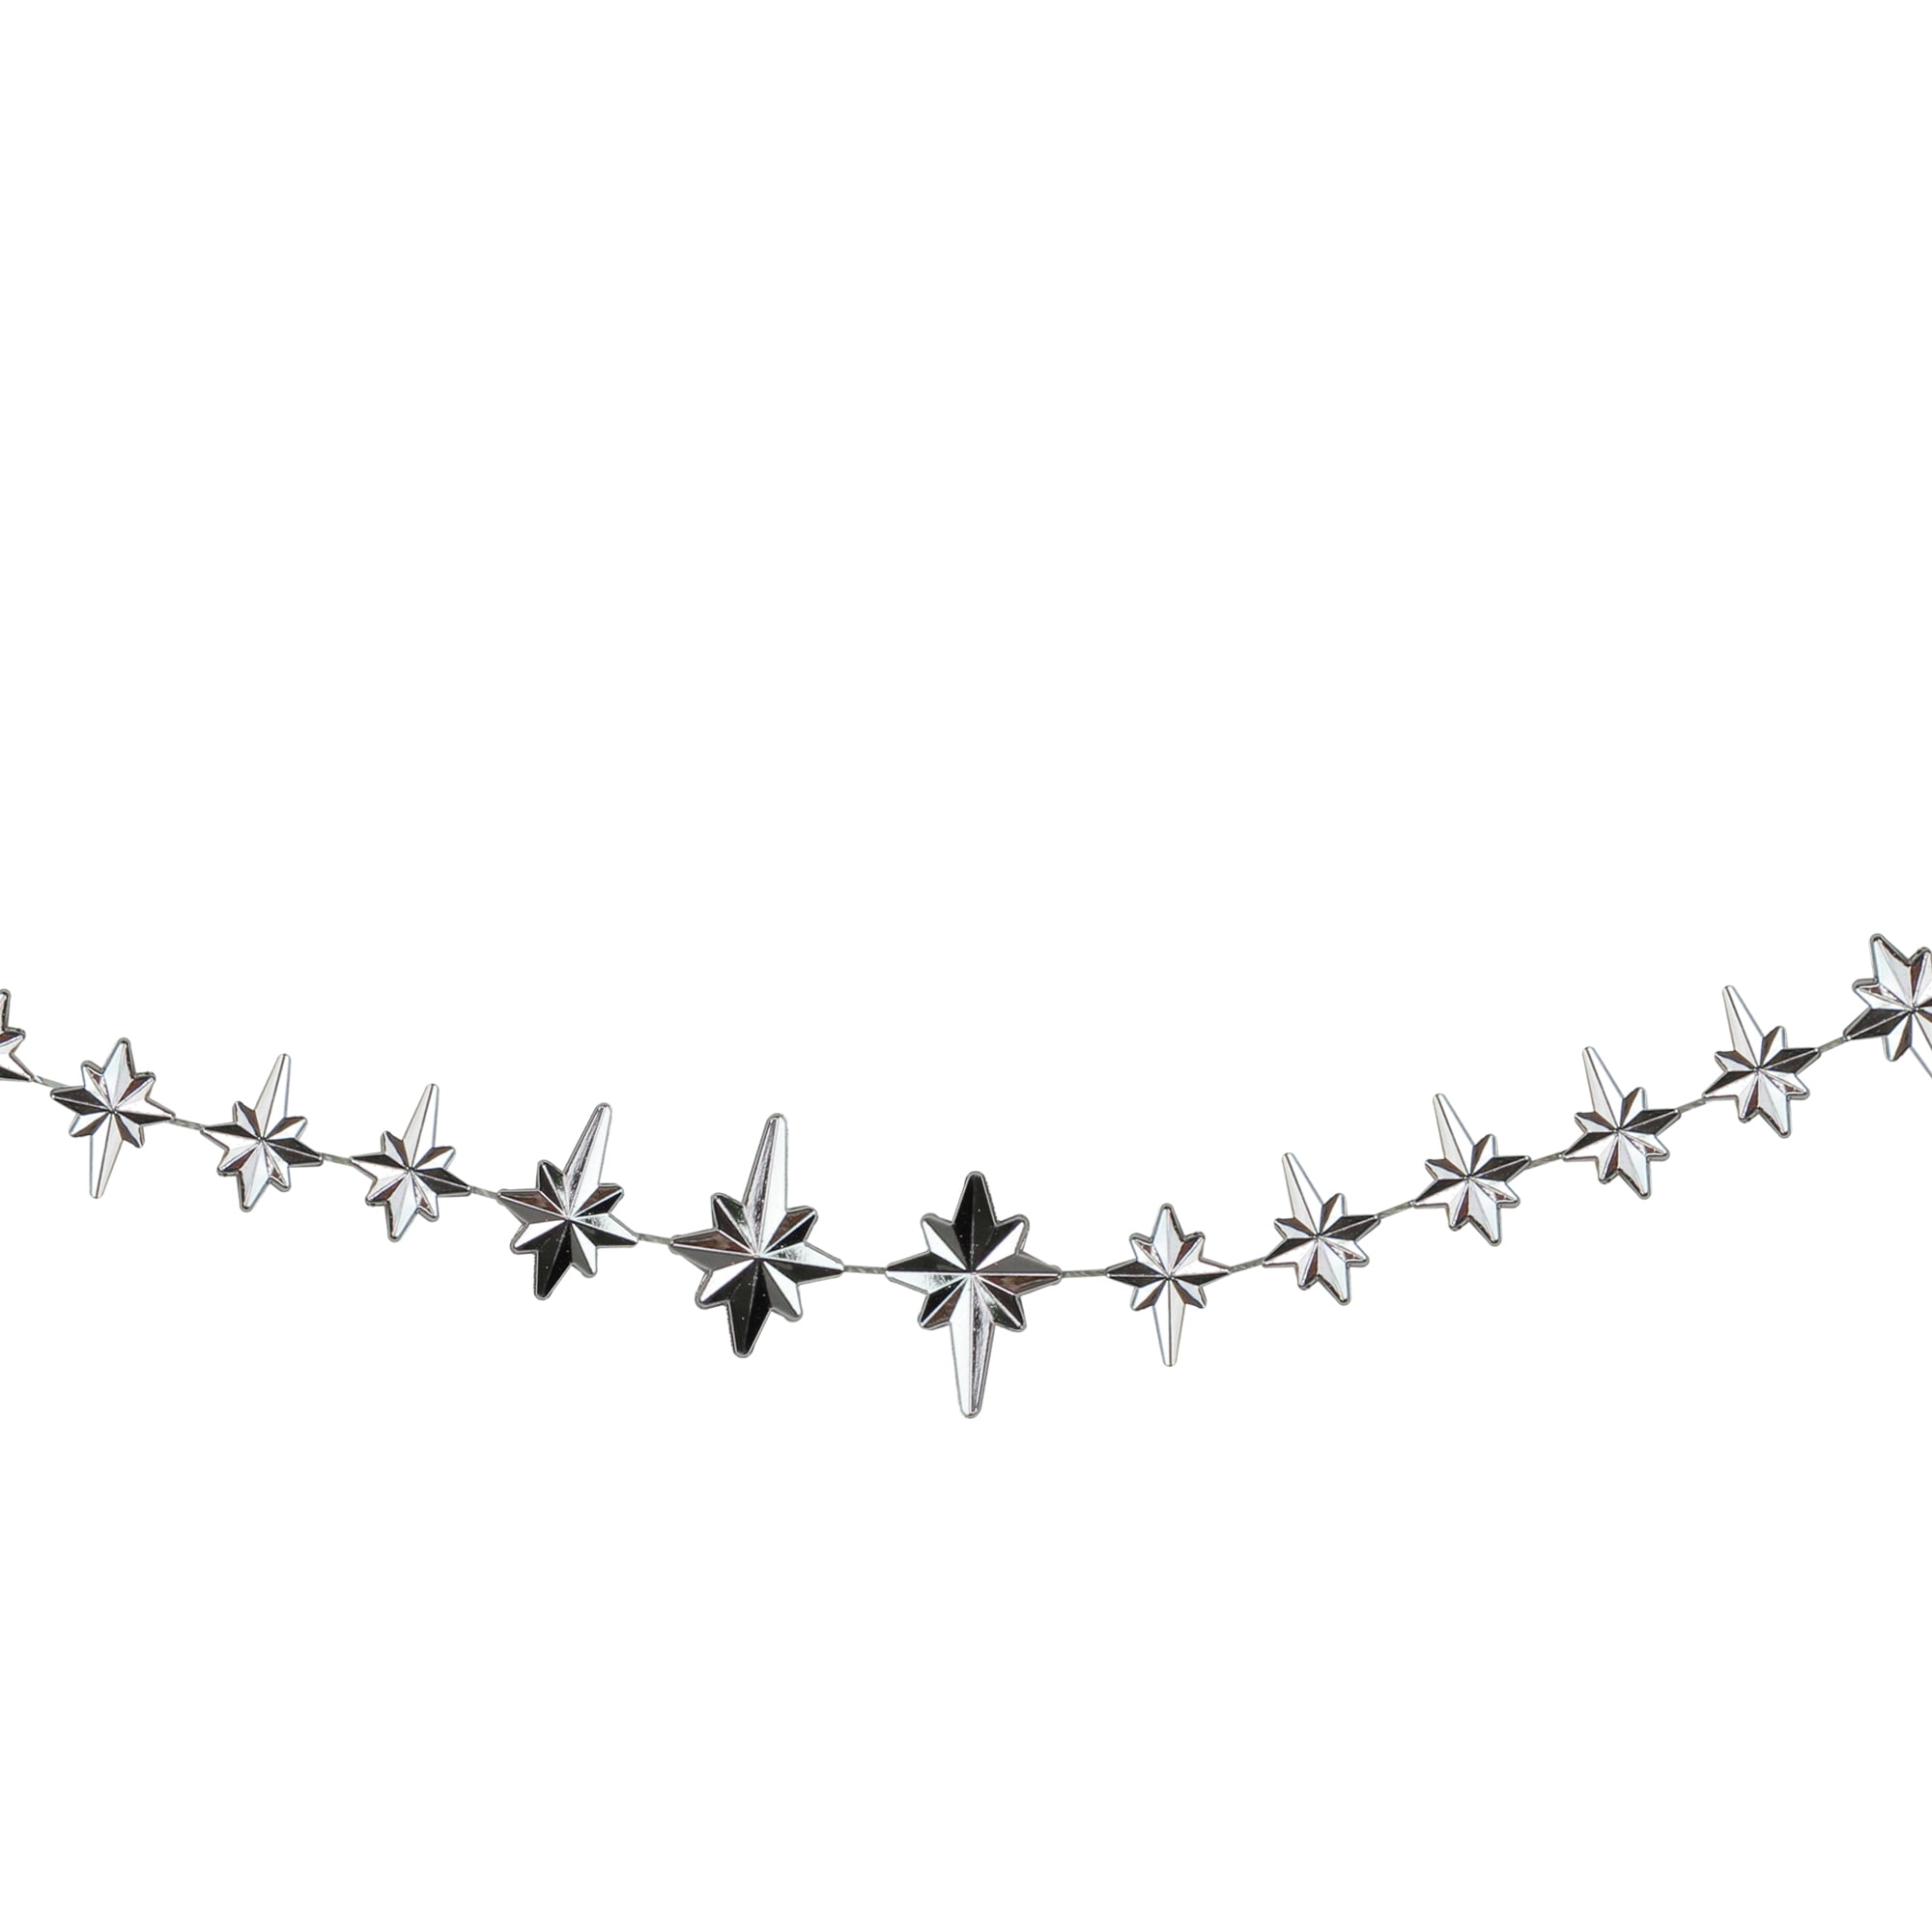 5 Count SILVER Christmas Star Decoration 9 Feet Long Wire Garland 